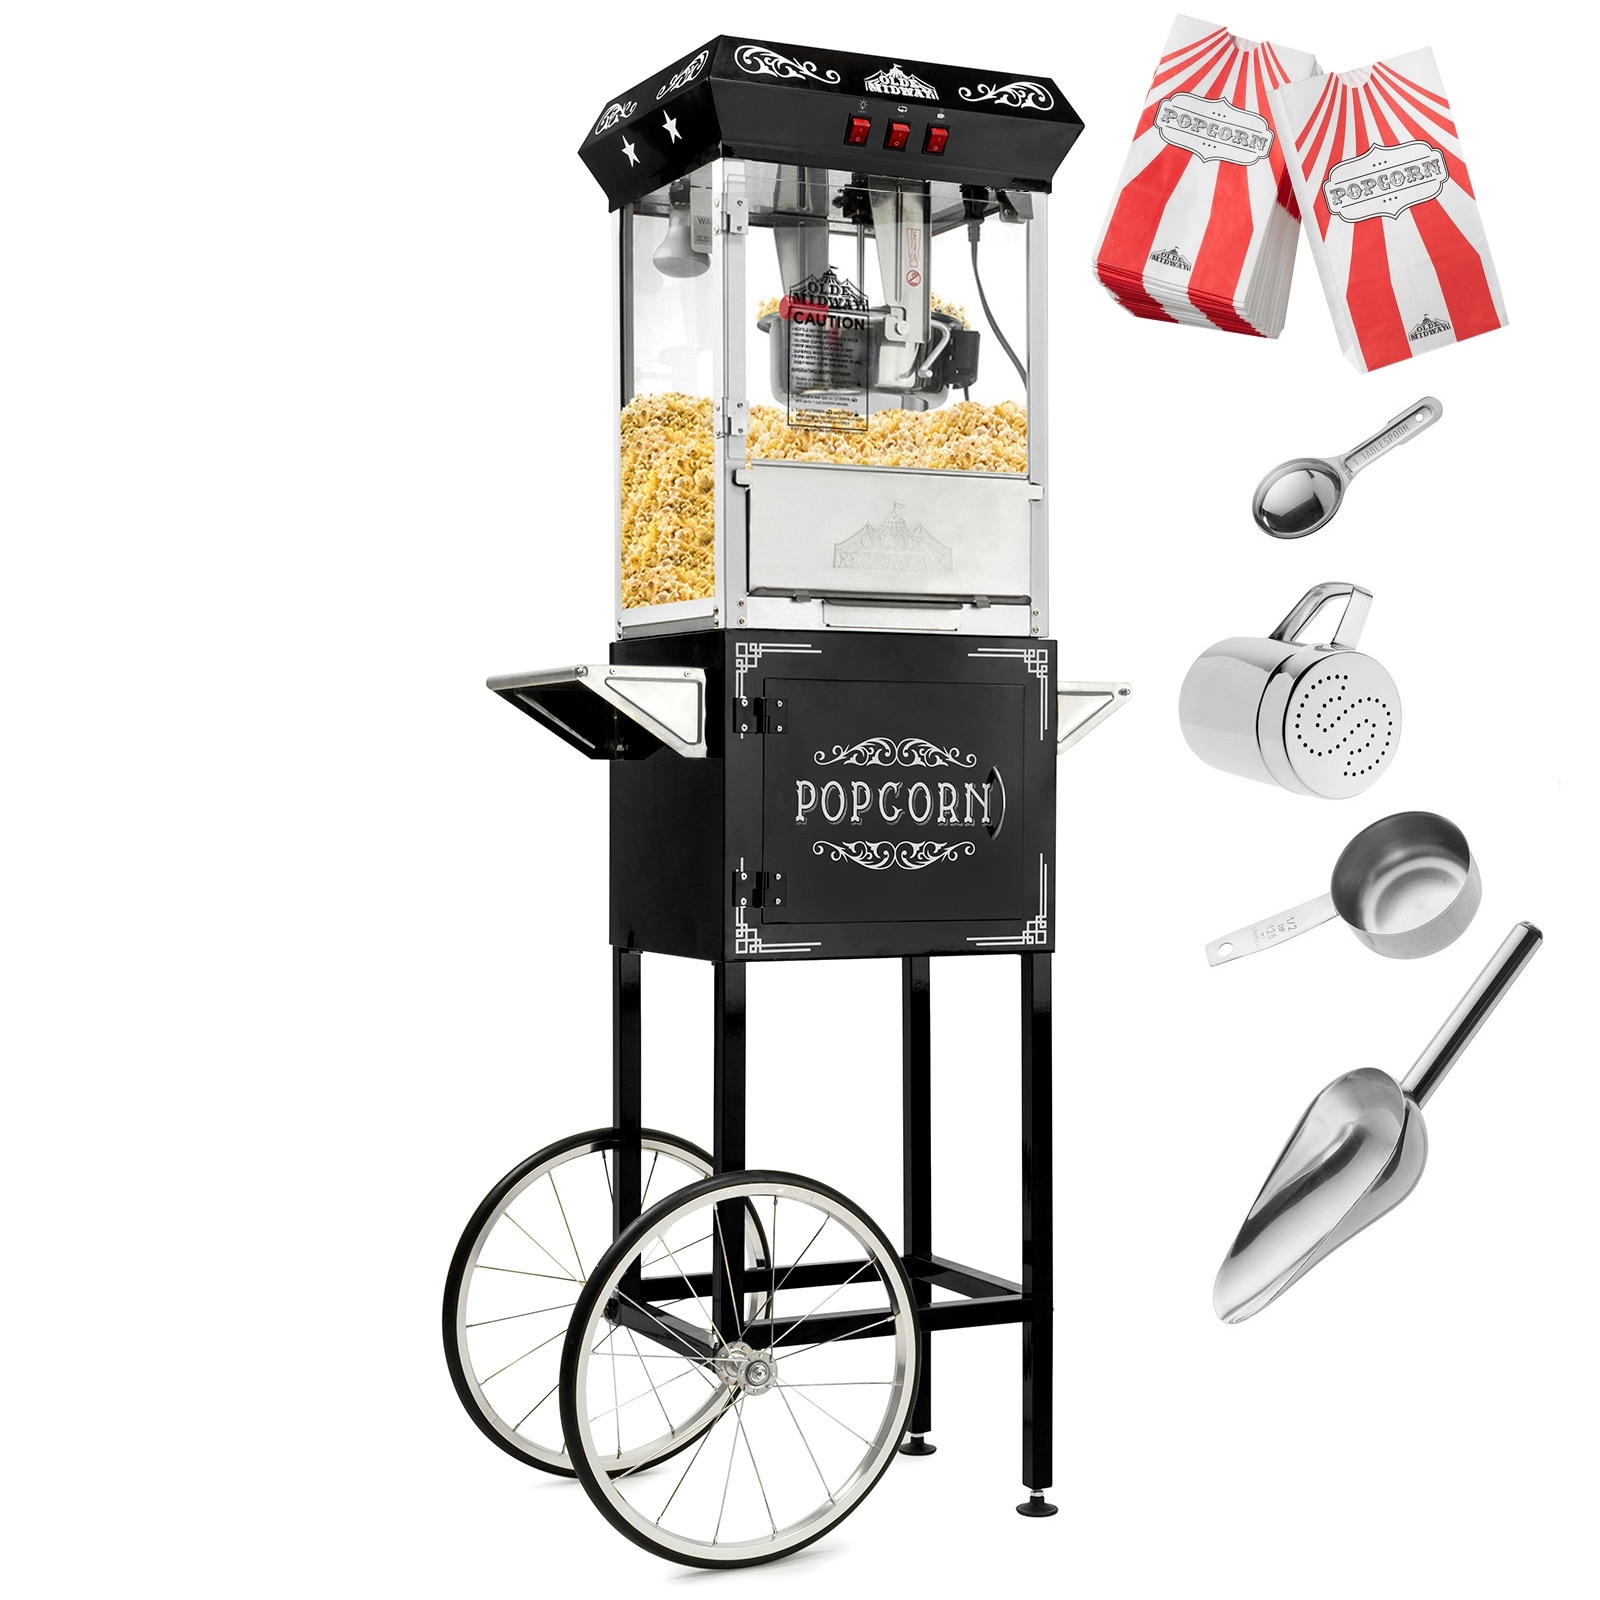 https://ak1.ostkcdn.com/images/products/is/images/direct/11acfa235d7bd878412d9037e598534f7ab677e5/Vintage-Style-Popcorn-Machine-Maker-Popper-w--Cart-and-10-Ounce-Kettle.jpg